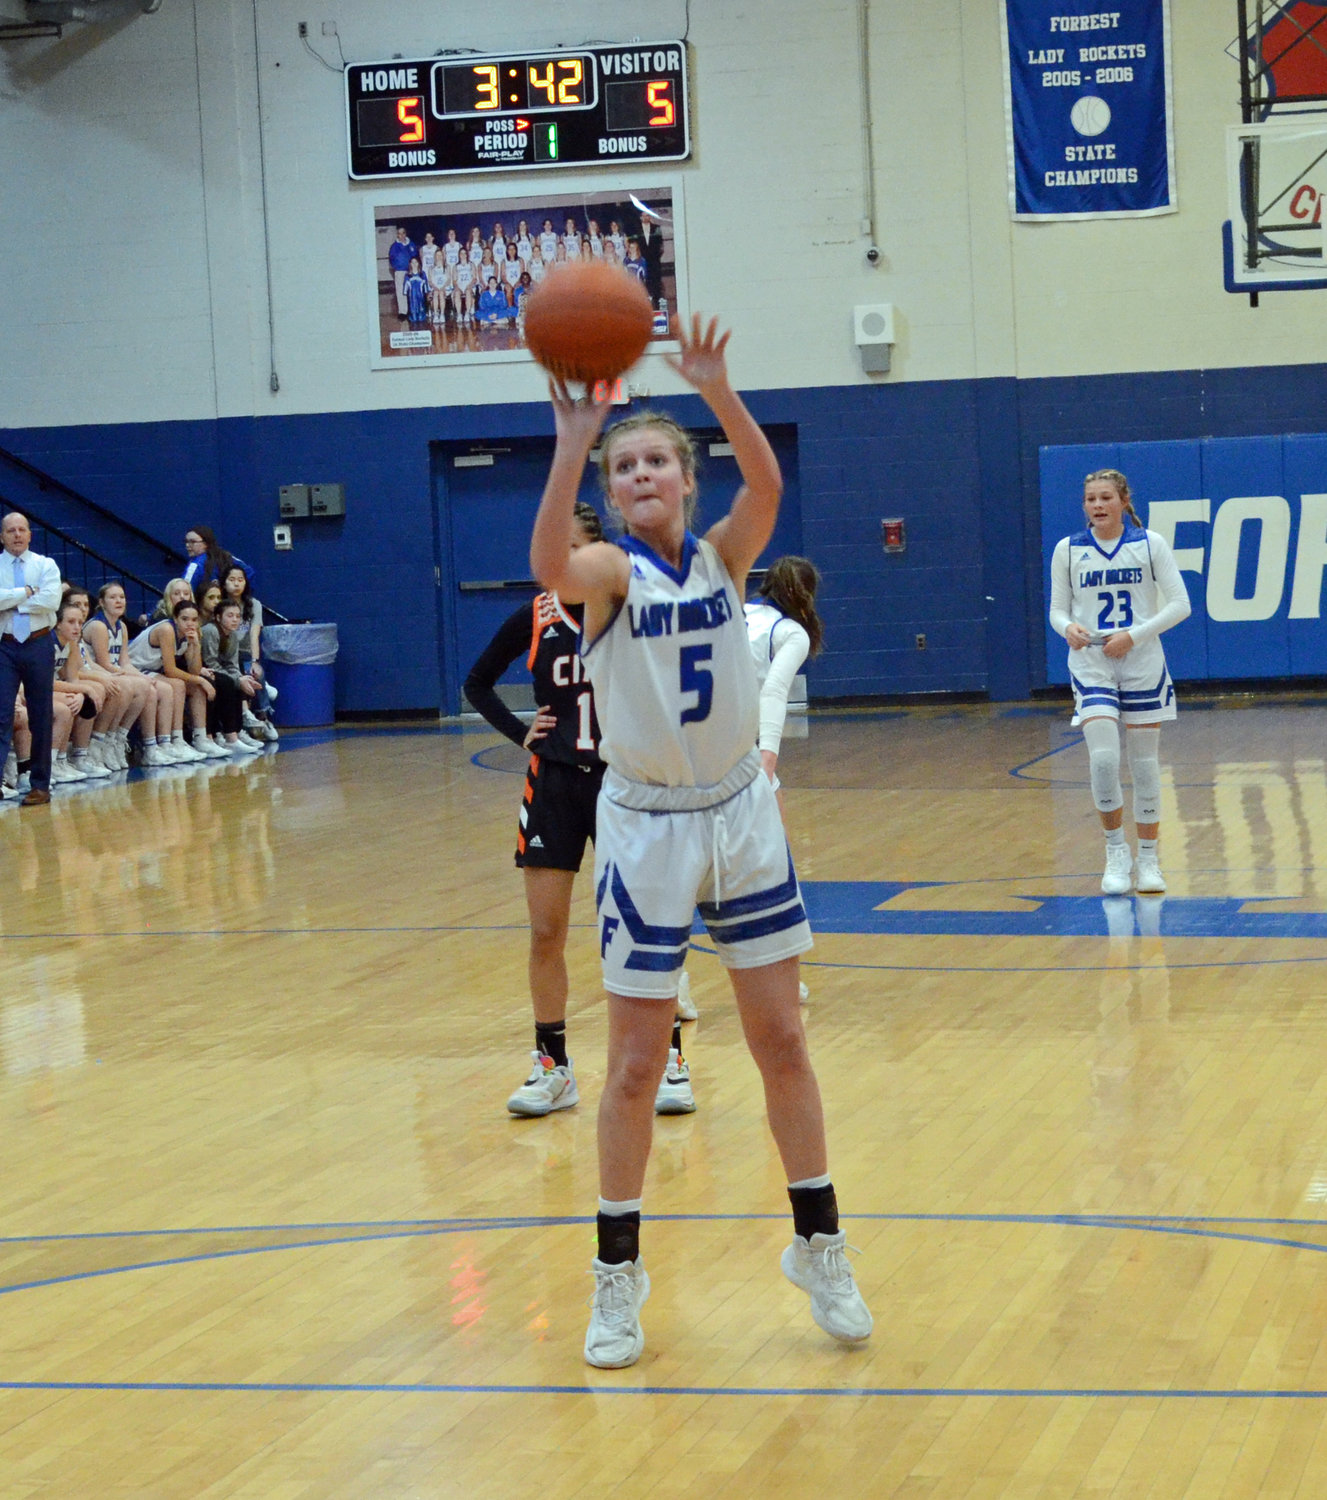 Macyn Kirby scored a game-high 16 points and went 6-for-9 from the free throw line.